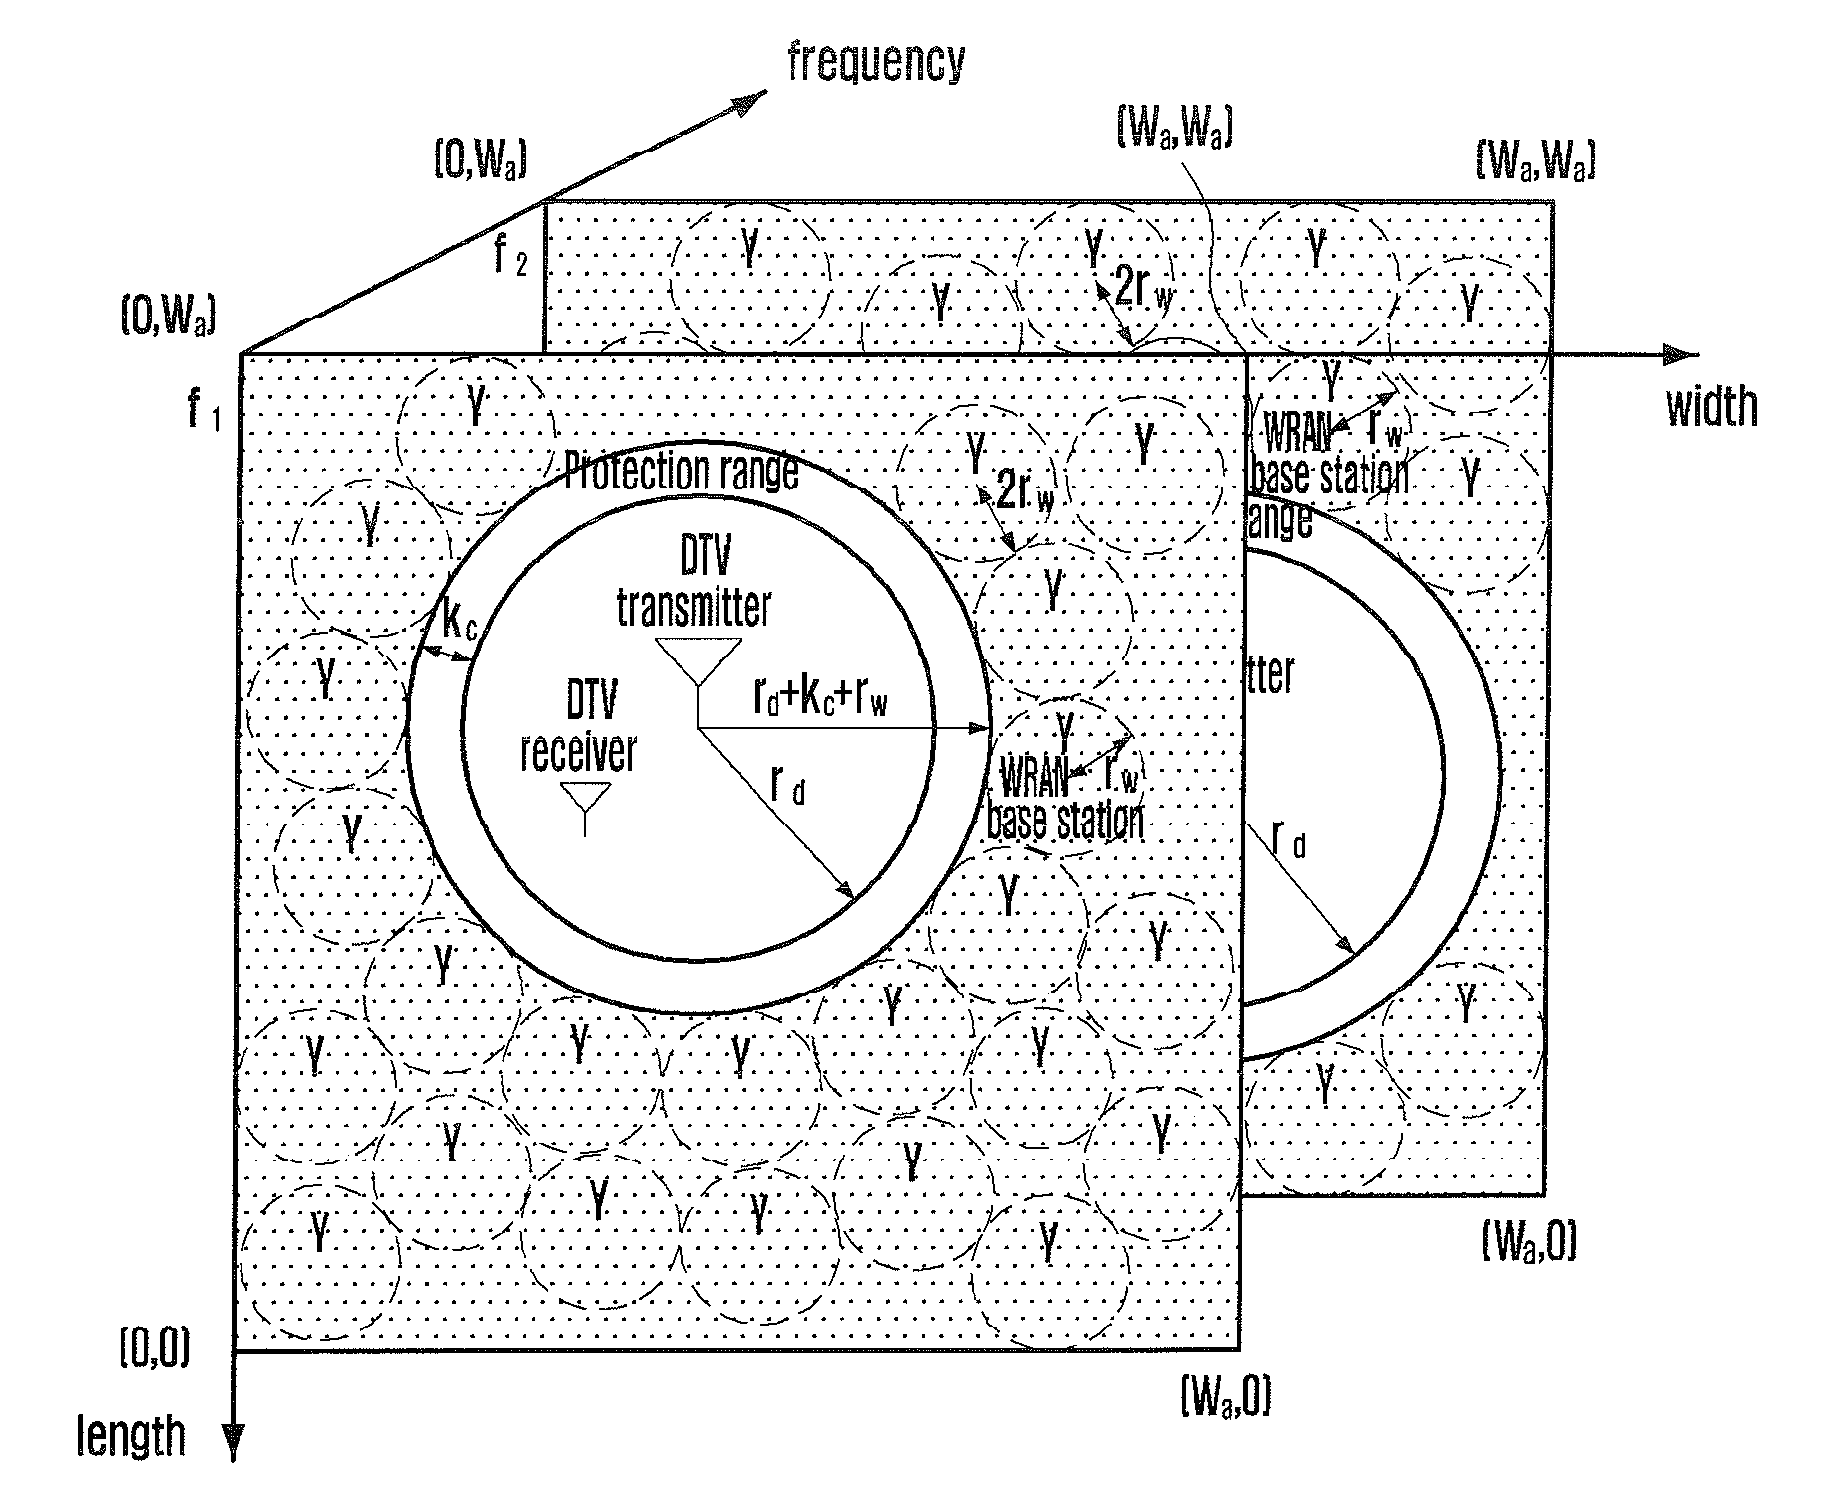 Method for evaluating spectrum utilization efficiency in radio system sharing frequency